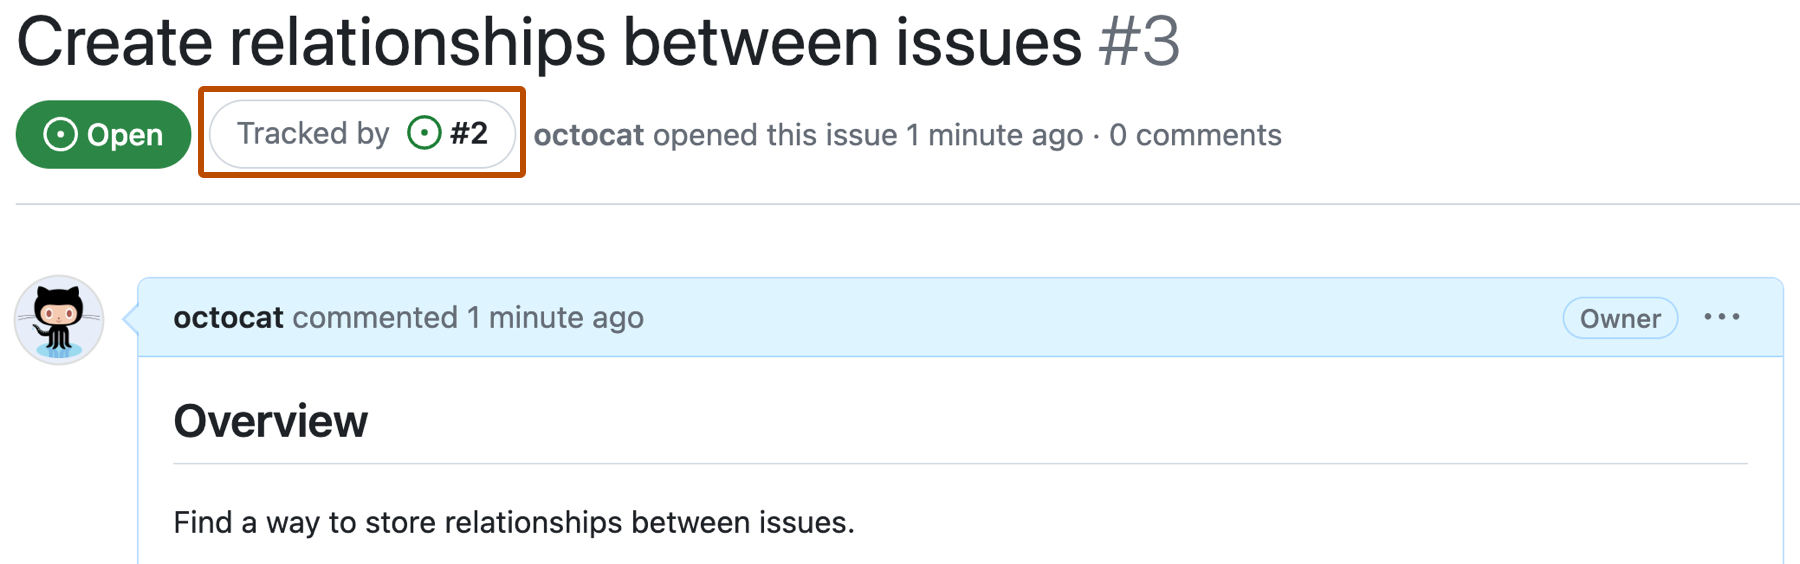 Screenshot of a GitHub issue named "Create relationships between issues" and numbered issue 3. A button below the issue title reading "Tracked by issue #2" is outlined in dark orange.